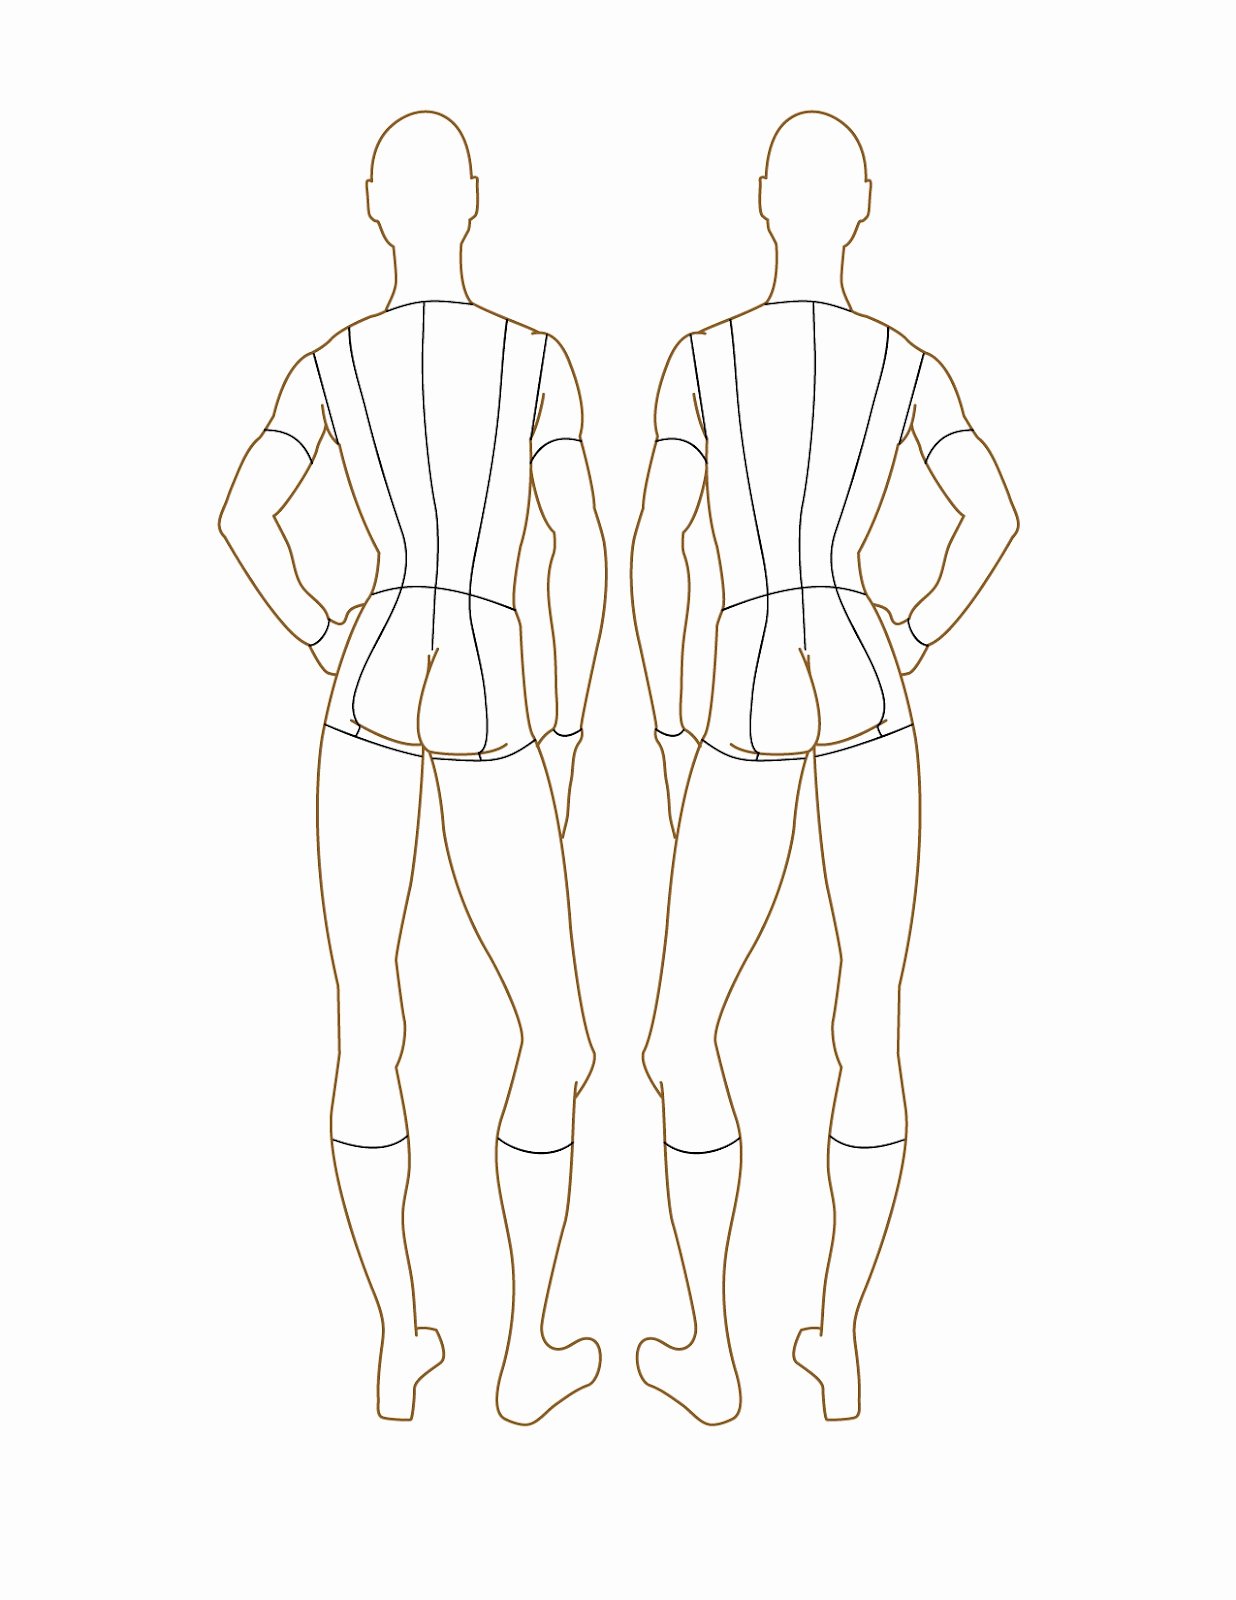 Costume Design Template Male Luxury Fashion Croquis 35 Free Examples Inspiration Jpg